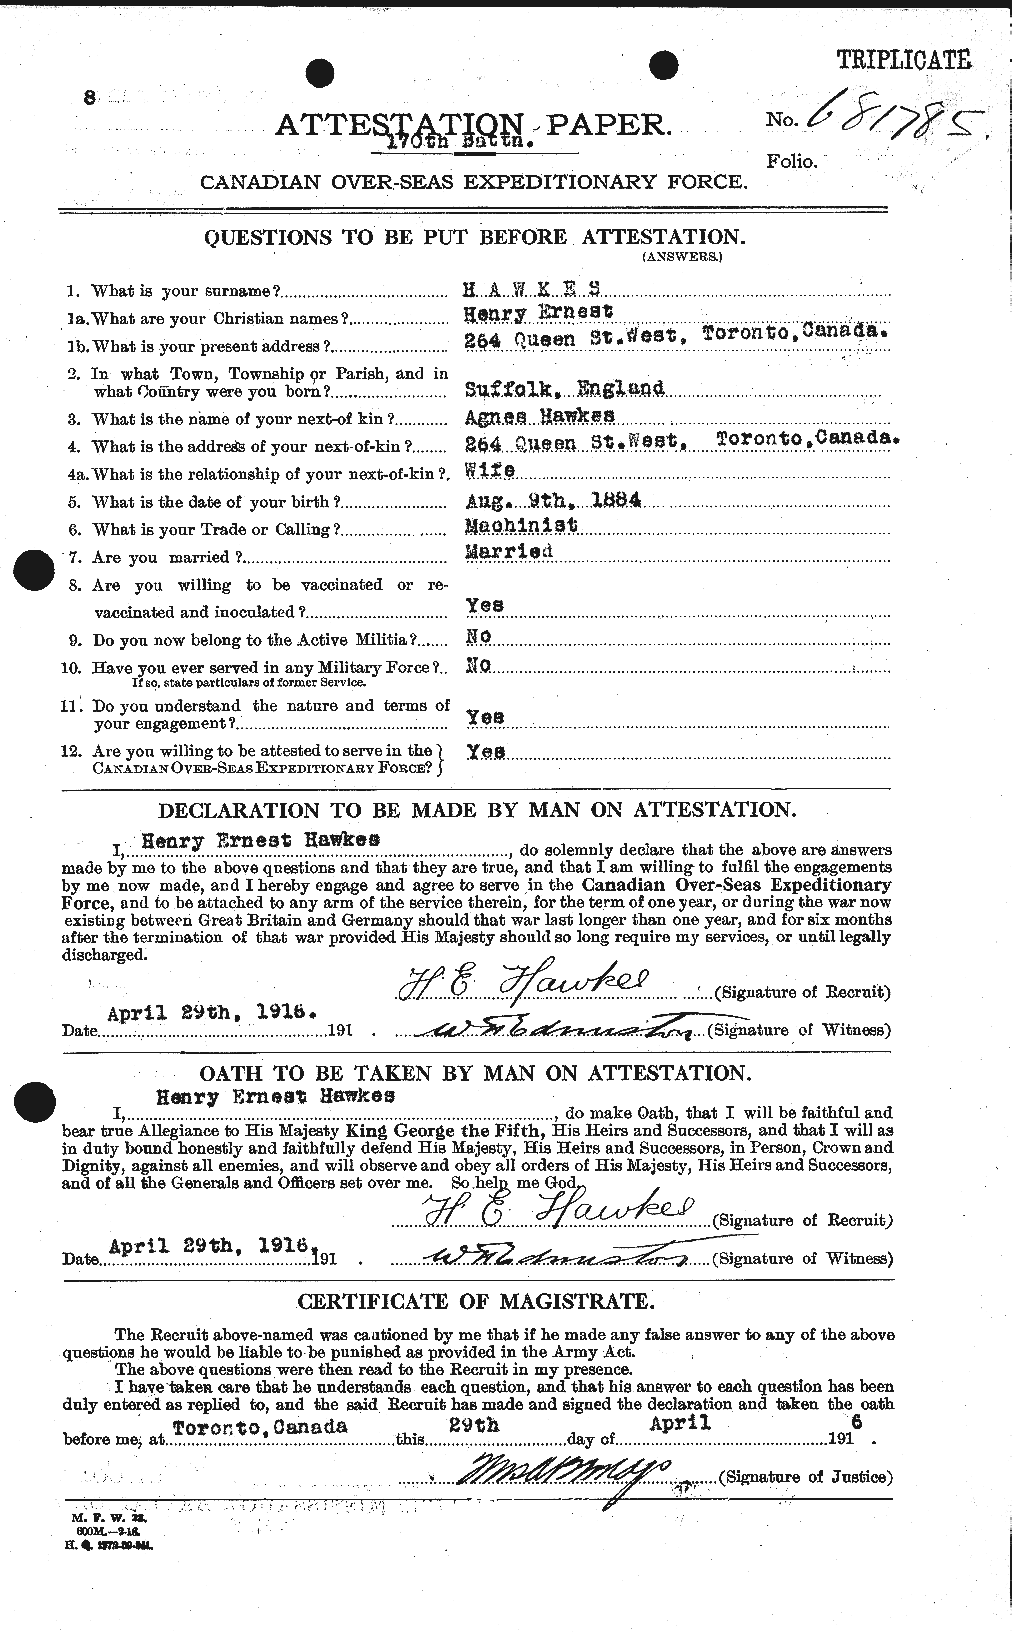 Personnel Records of the First World War - CEF 384540a